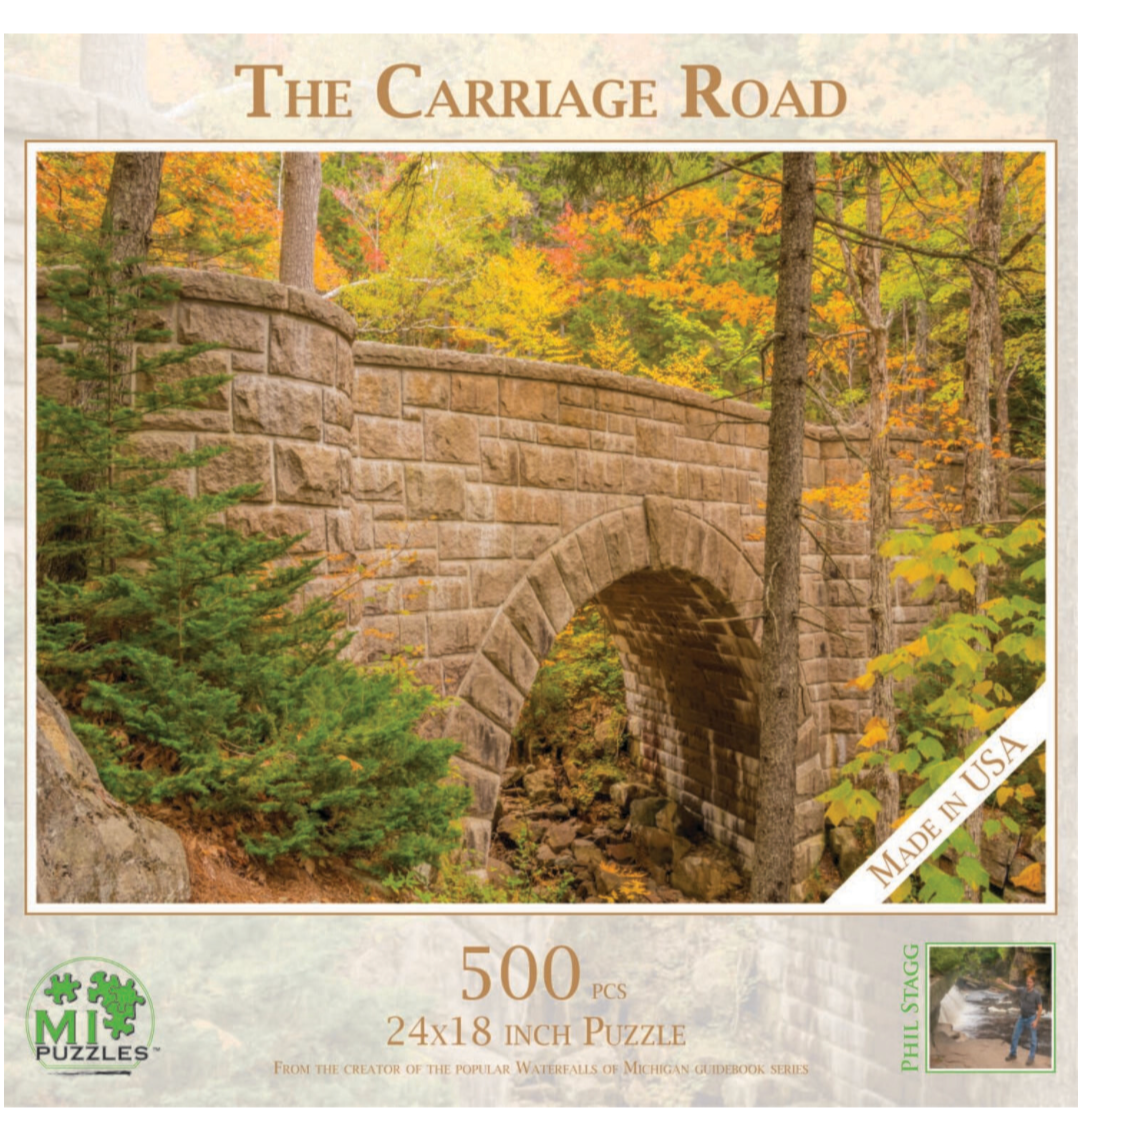 The Carriage Road 500 pc Puzzle